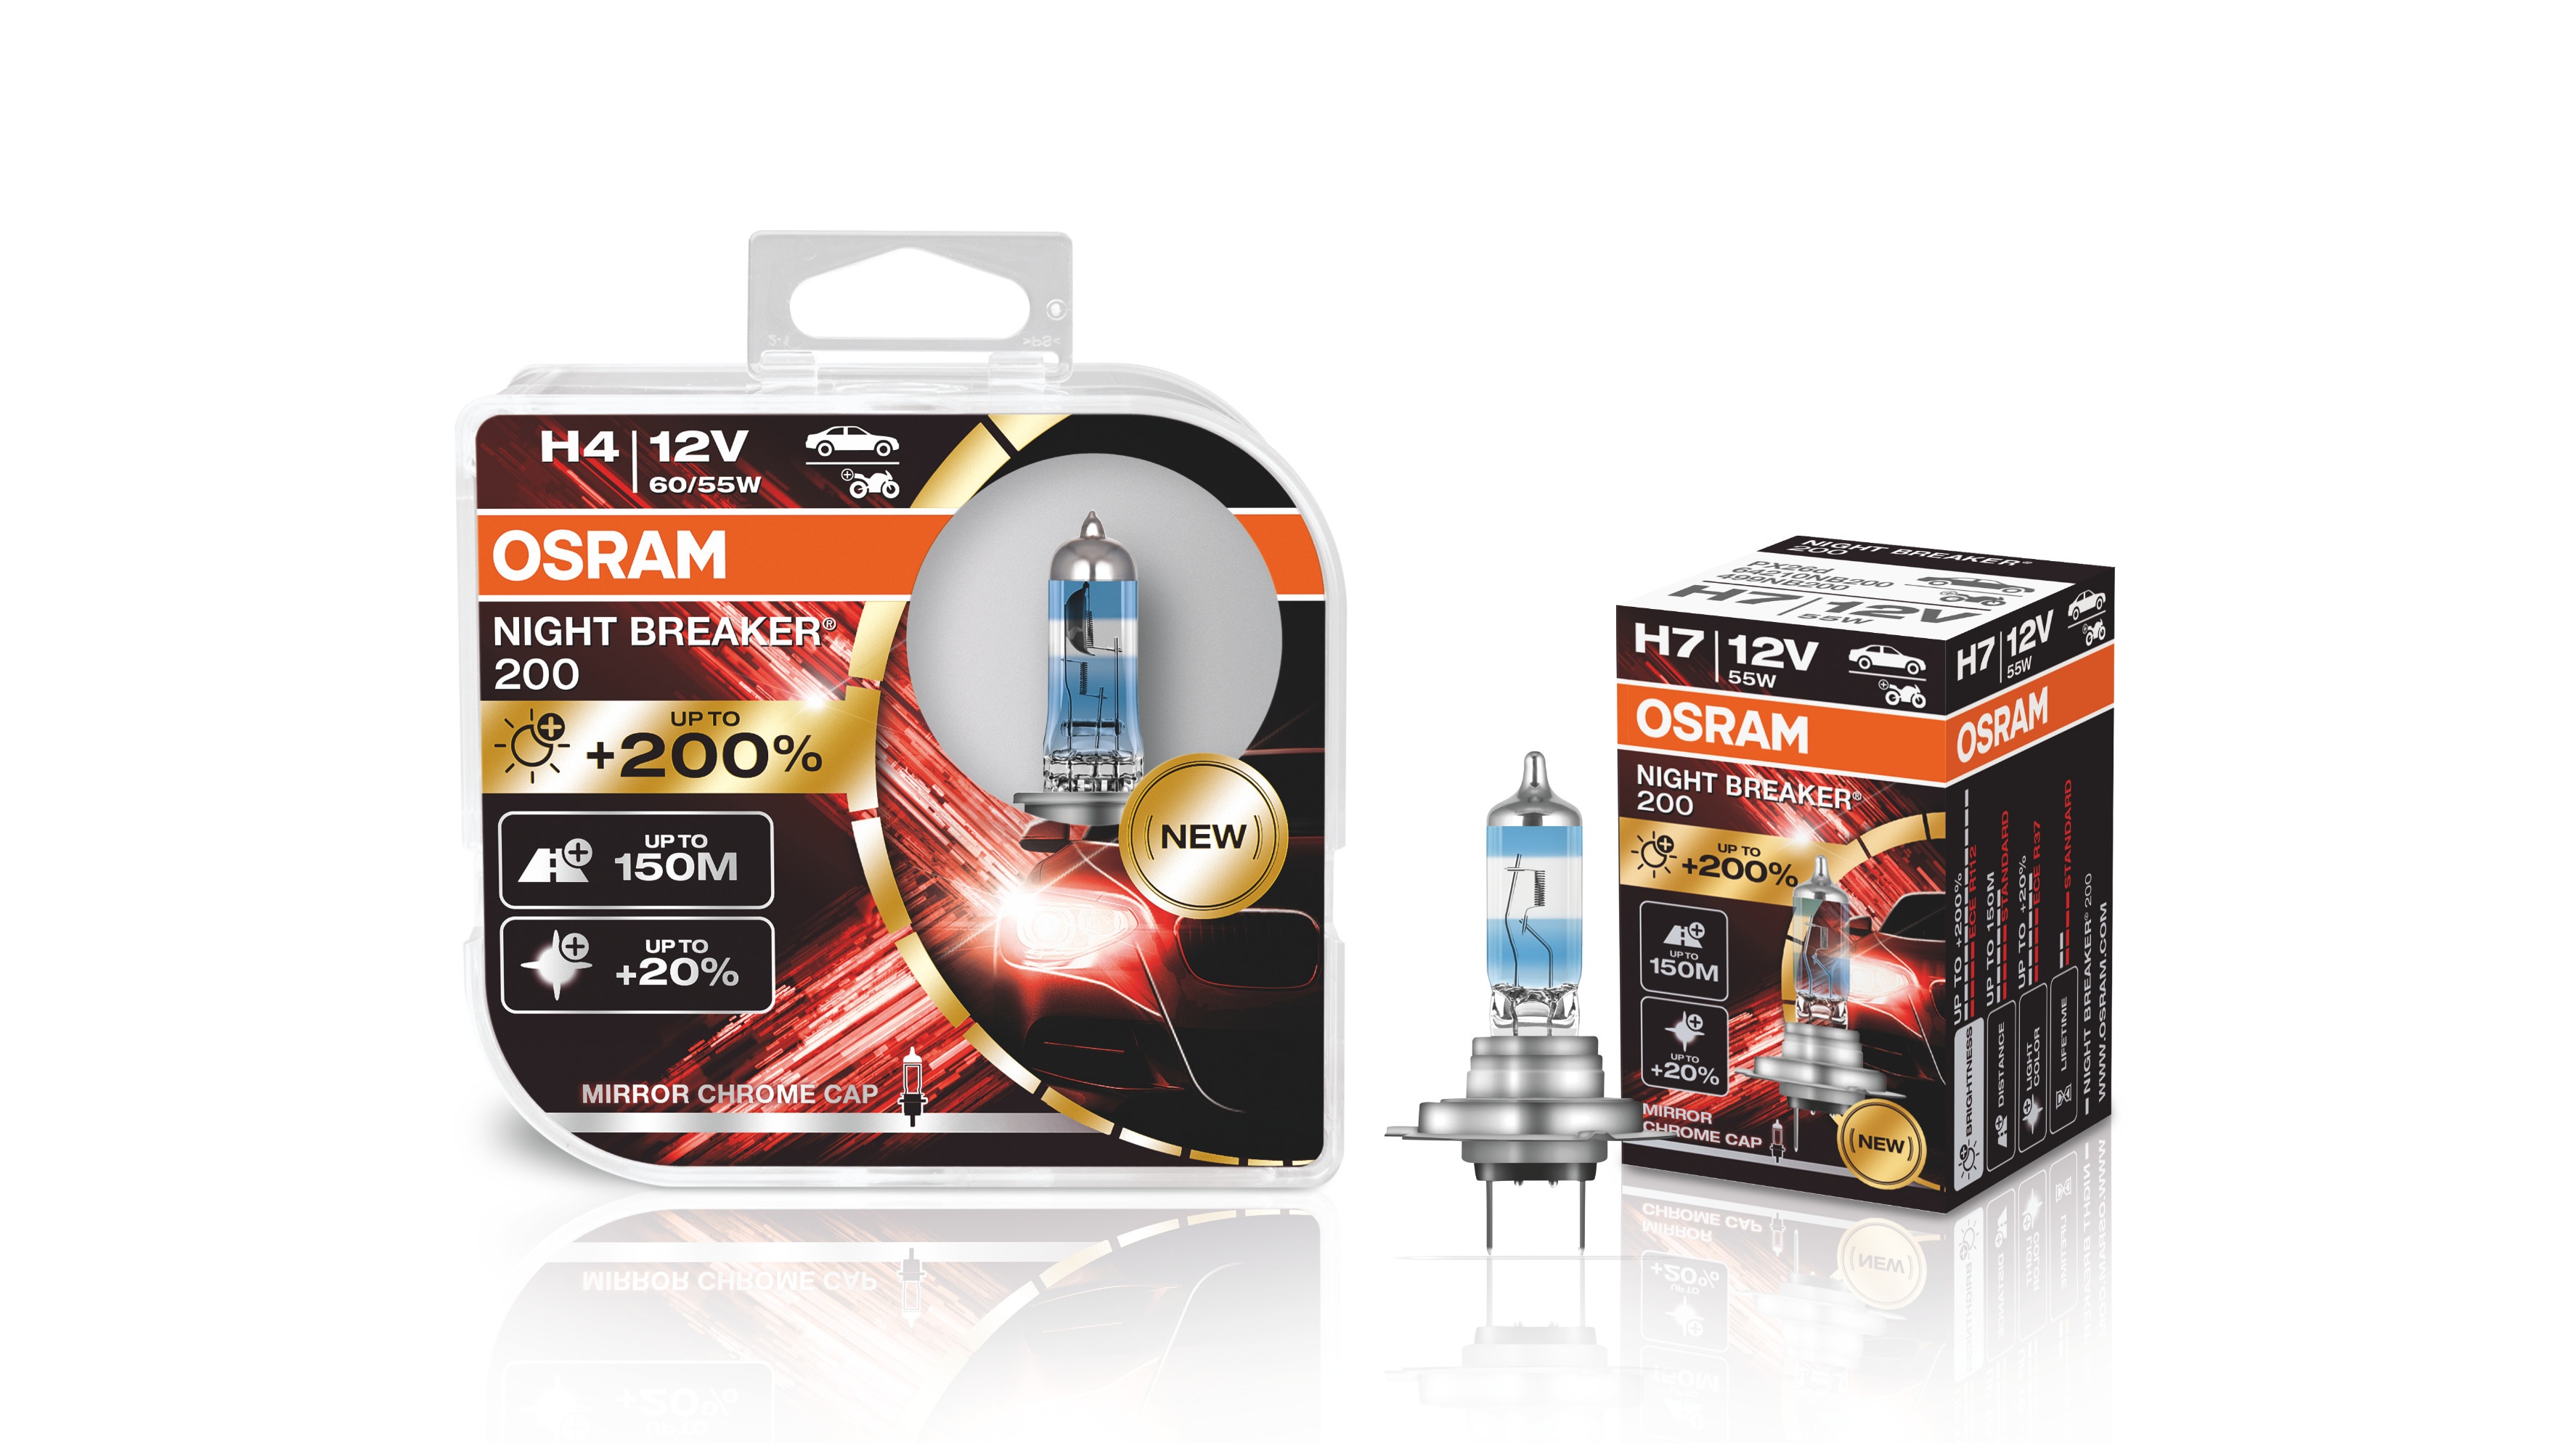 Buying lamps with foresight – see the future road faster and better with Osram